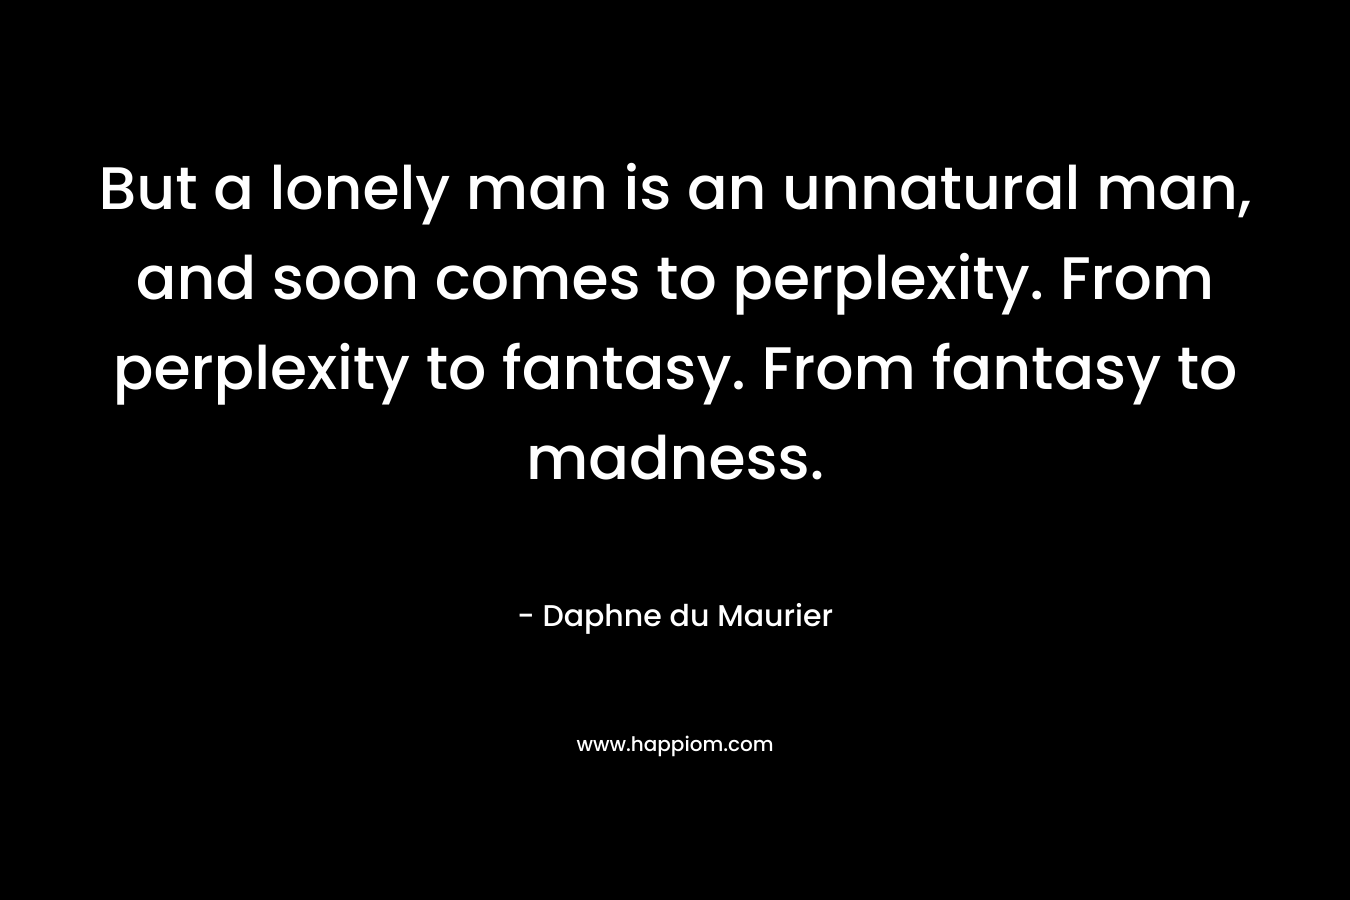 But a lonely man is an unnatural man, and soon comes to perplexity. From perplexity to fantasy. From fantasy to madness. – Daphne du Maurier